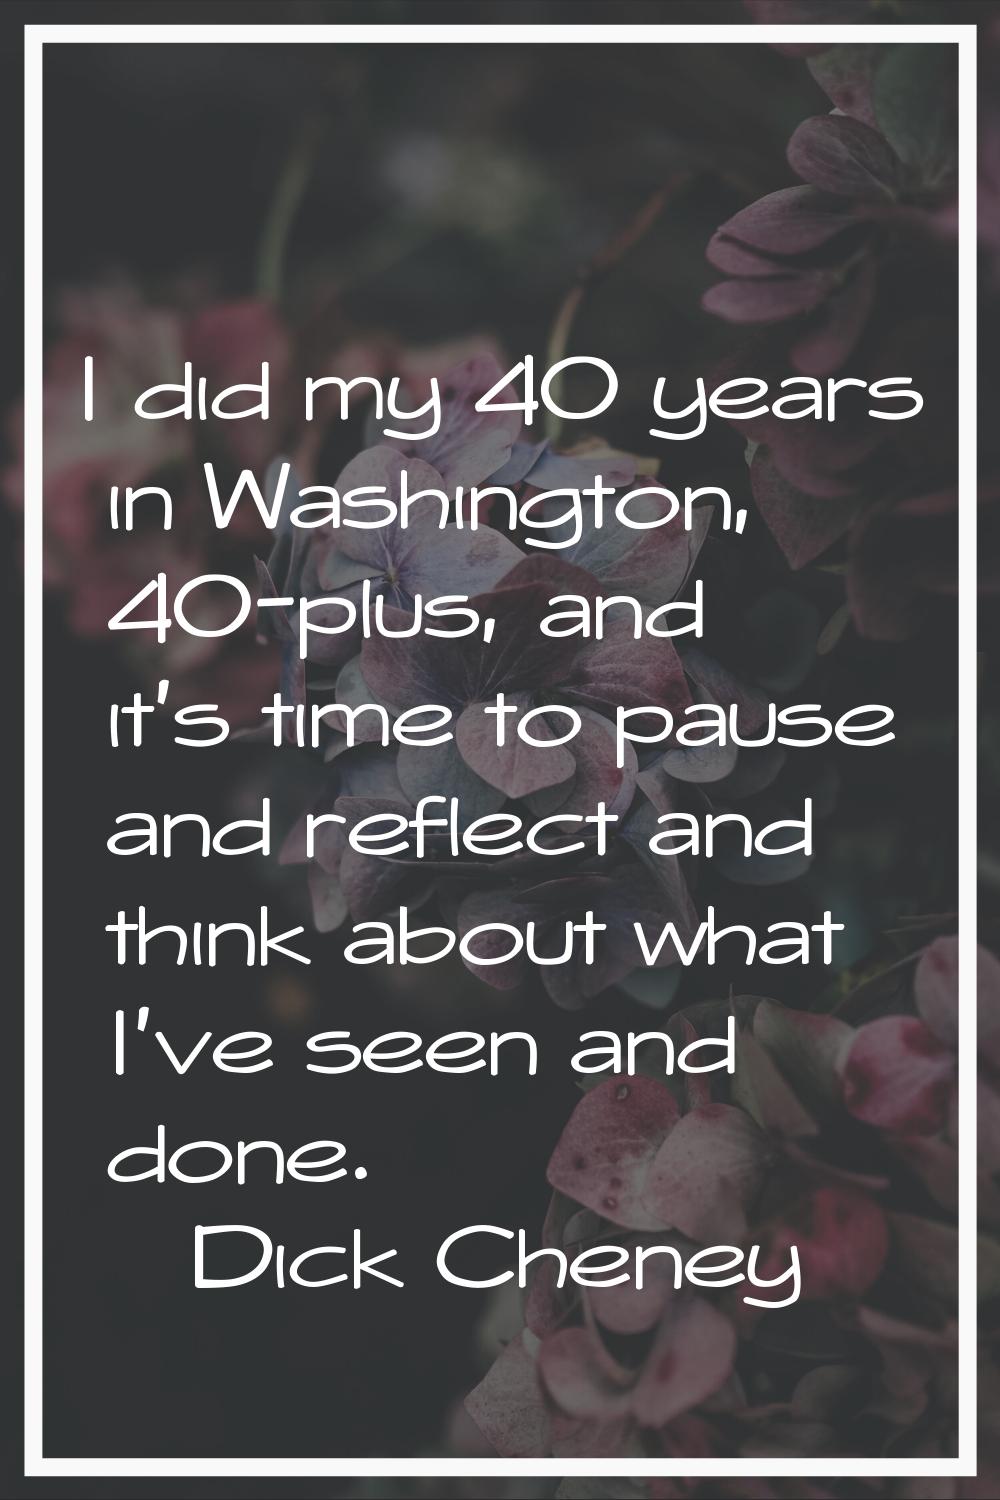 I did my 40 years in Washington, 40-plus, and it's time to pause and reflect and think about what I